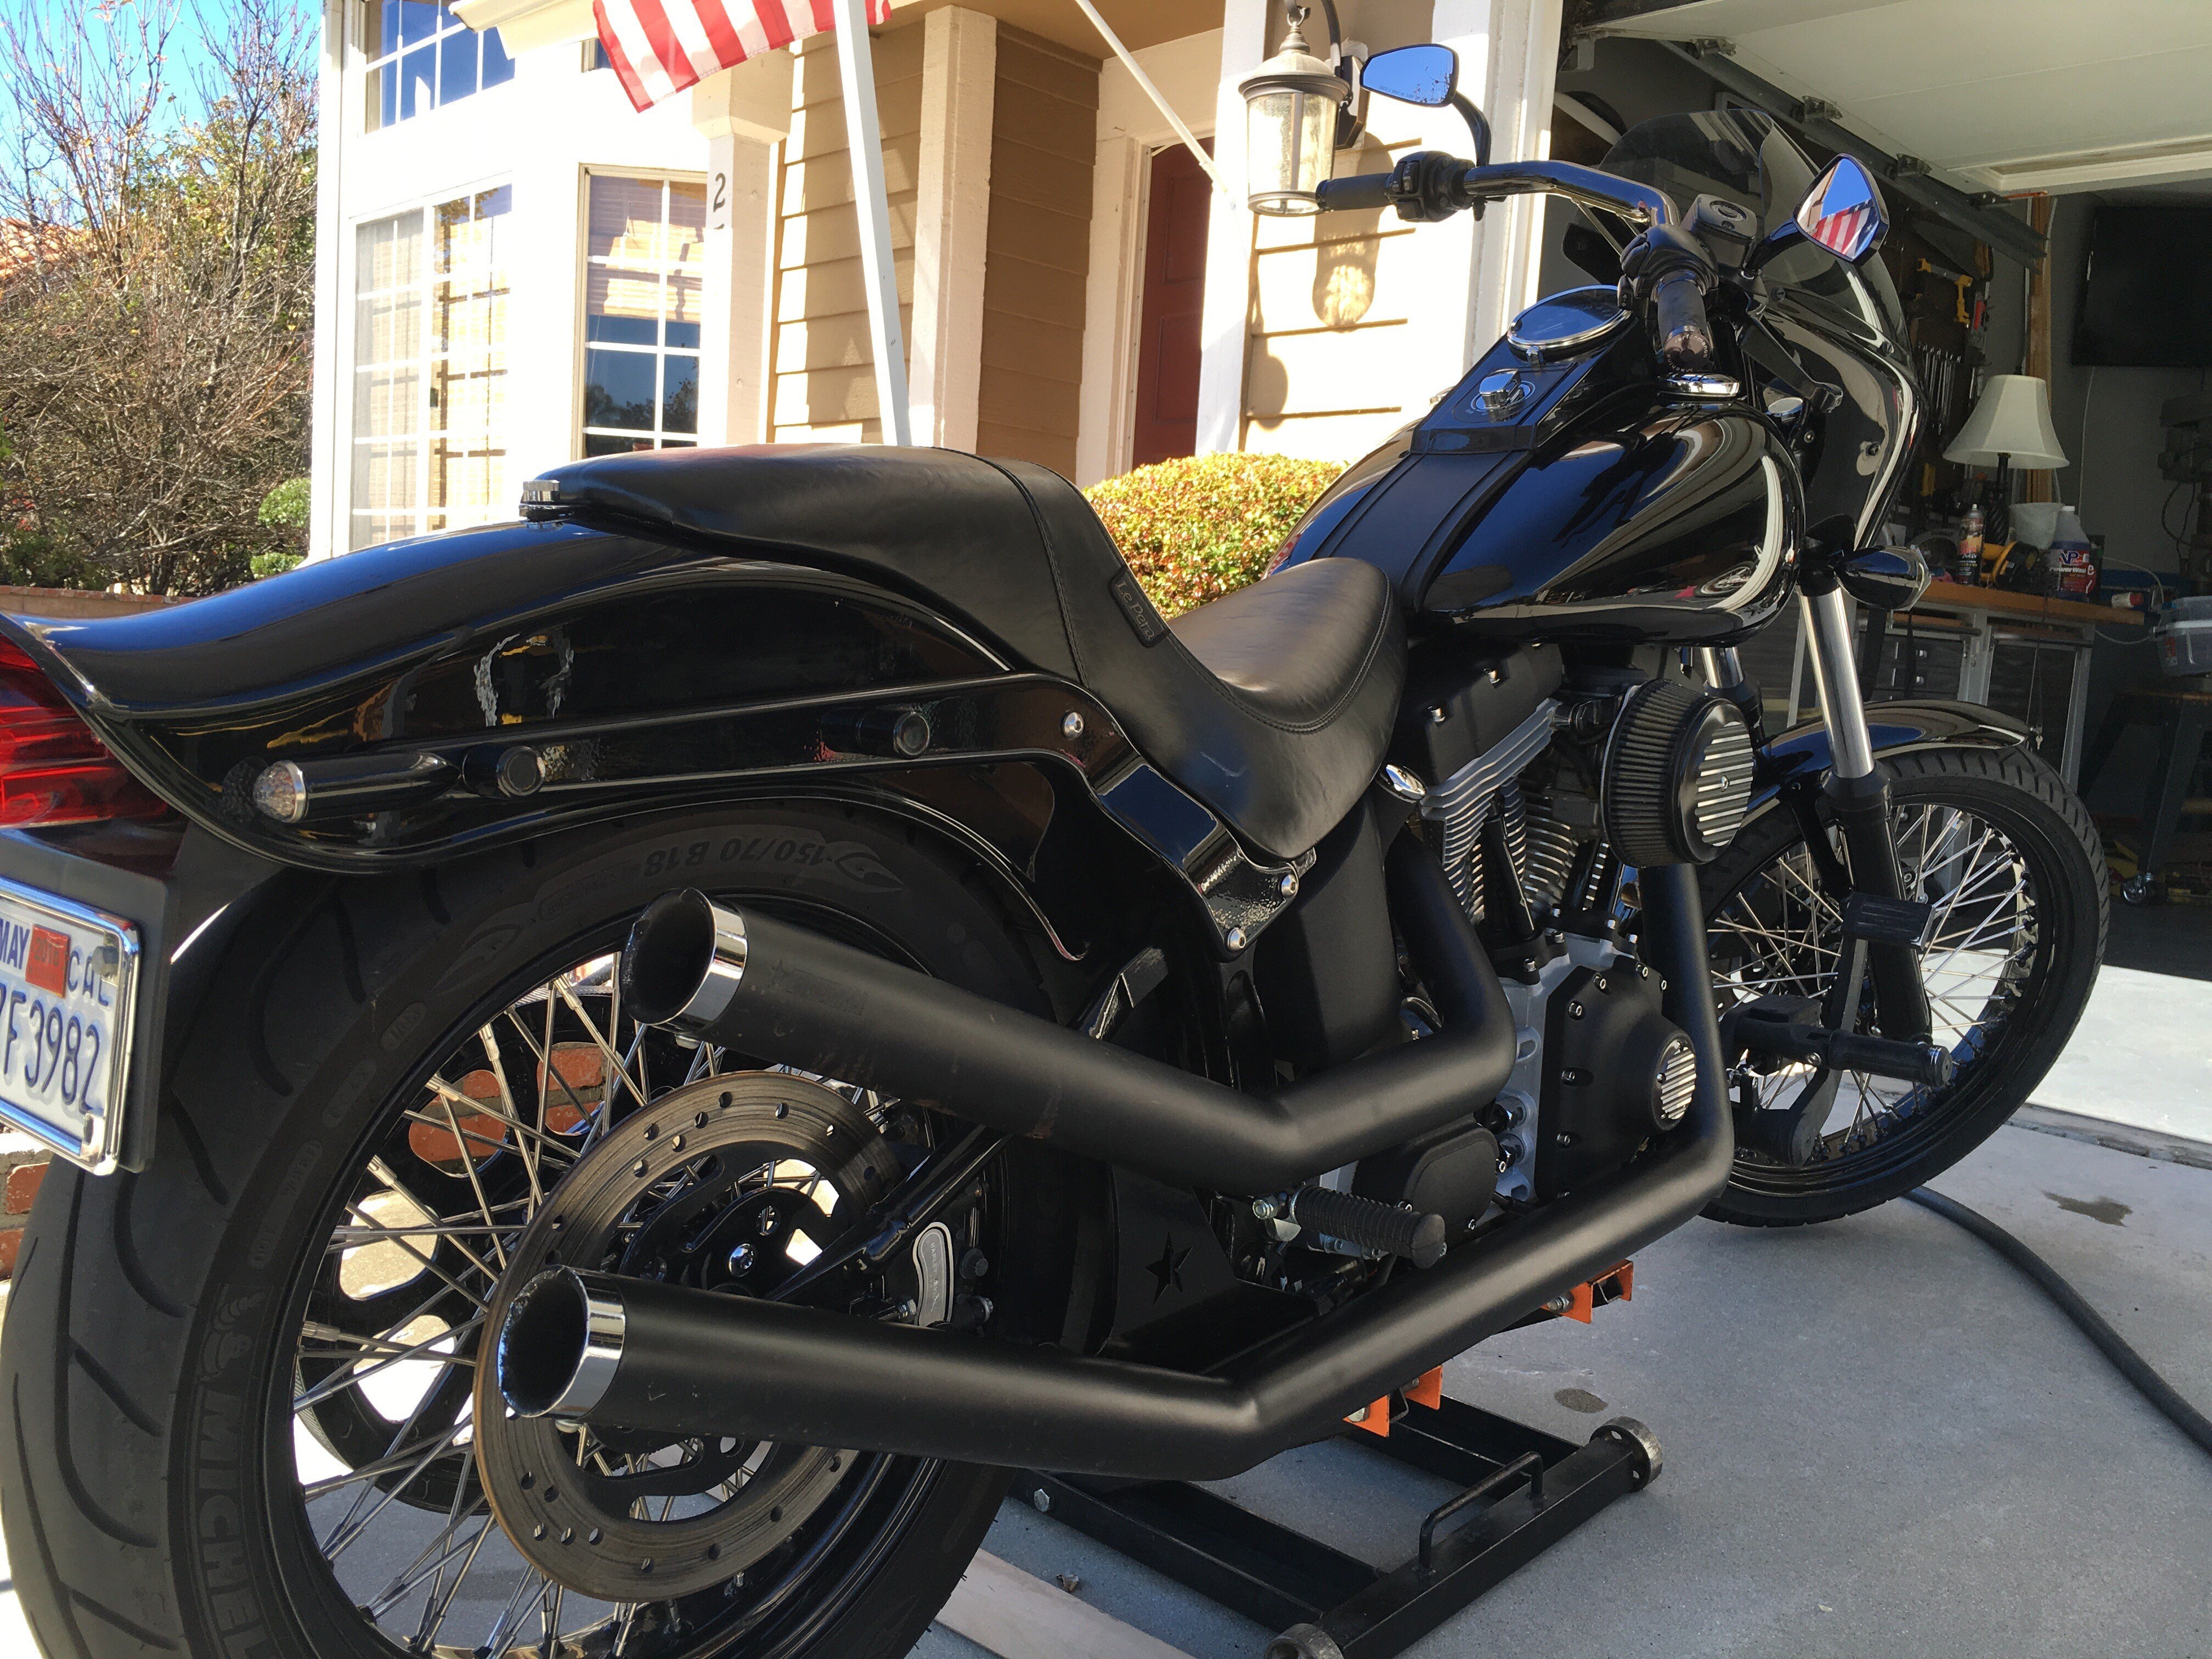 Motorcycles for Sale near Riverside, California - Motorcycles on 